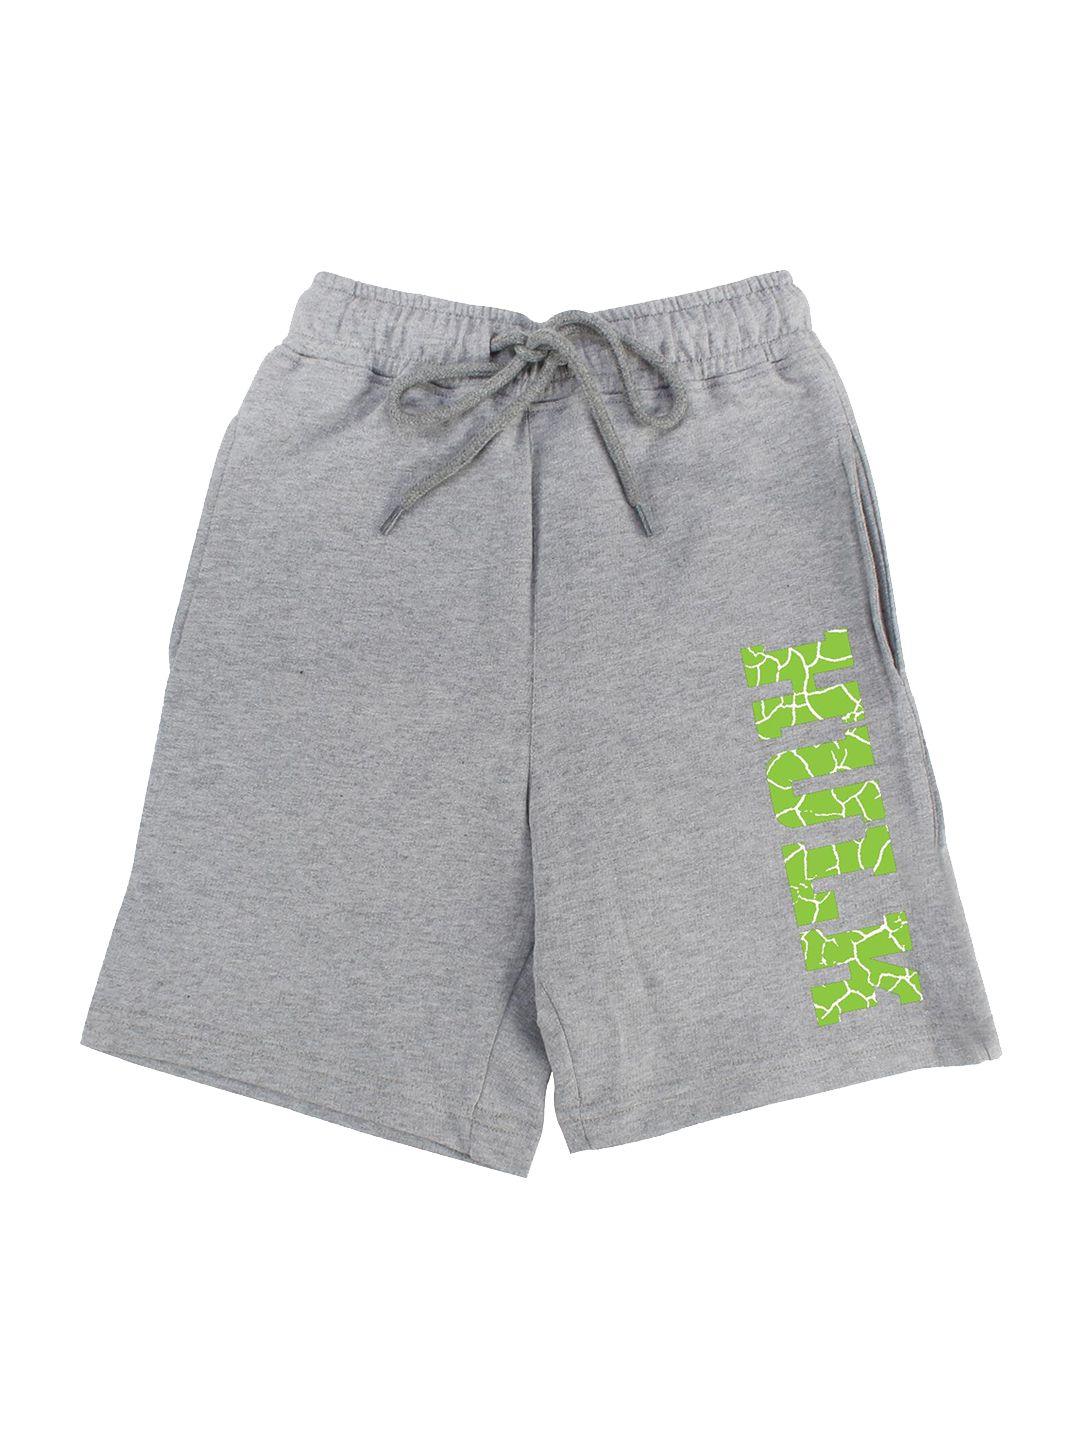 marvel by wear your mind boys grey graphic print shorts